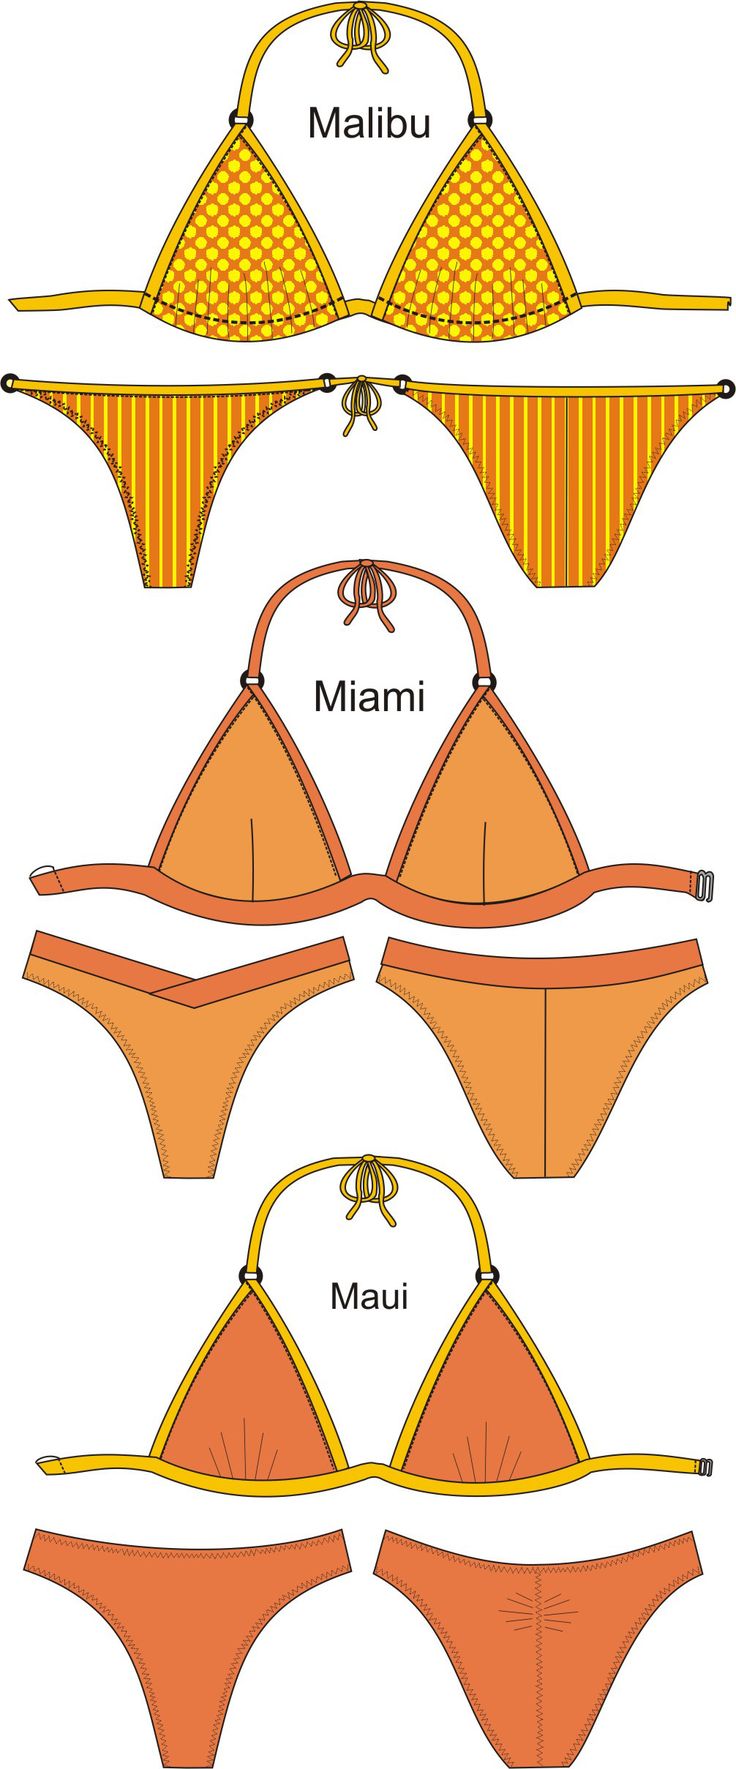 Sewing patterns for the 3 Classic Triangle bikini tops and 3 tangas bottoms in s...